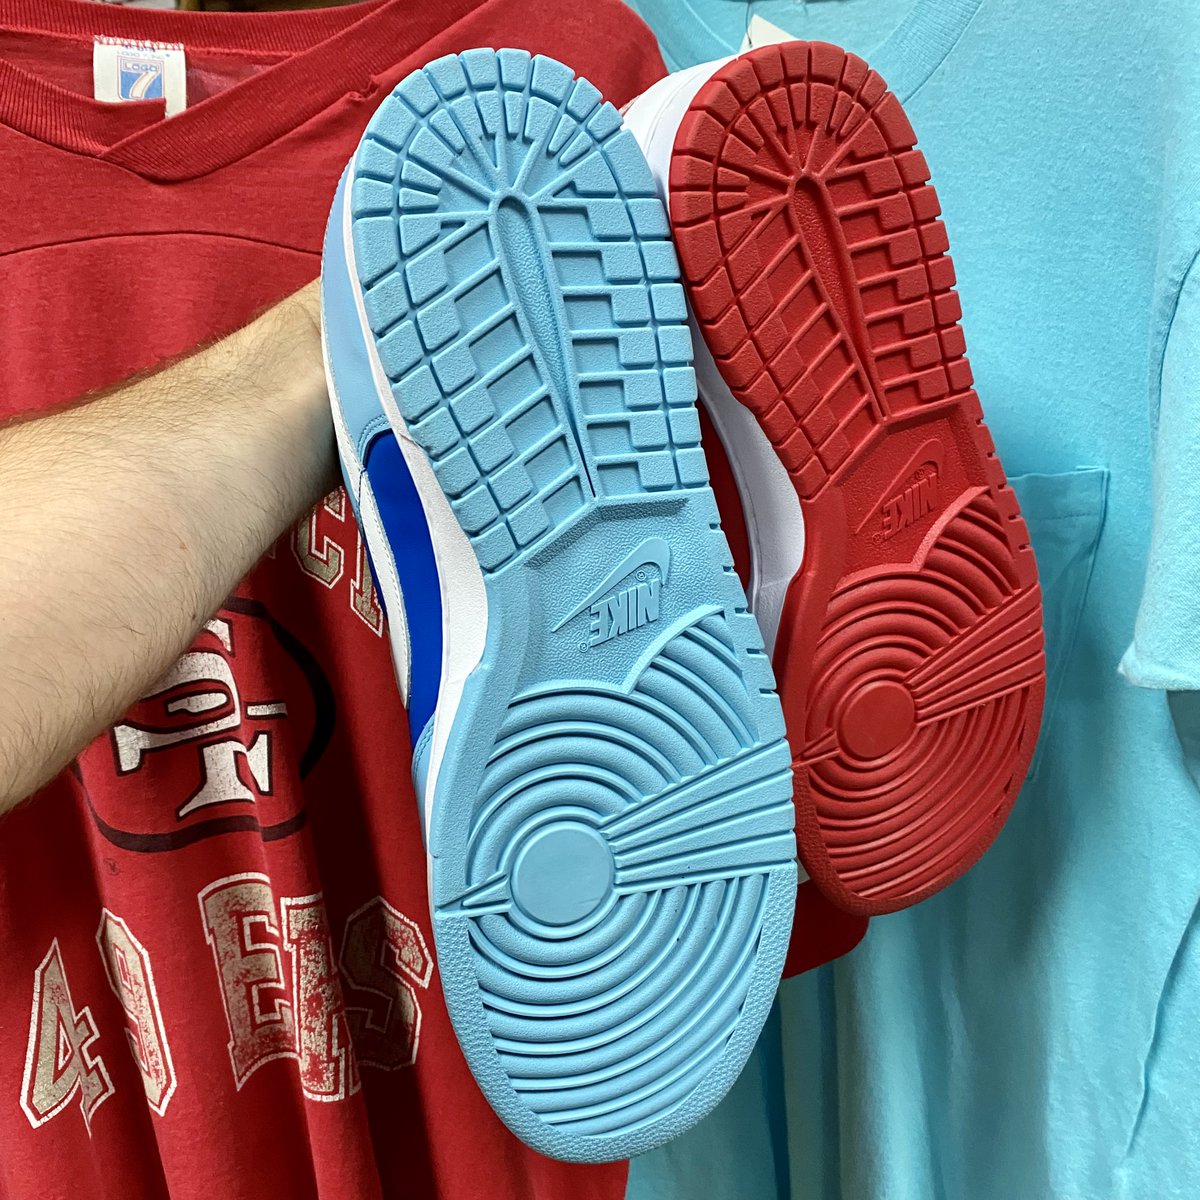 POV: You're in the sneaker matrix. Which shoe will you choose, the red or the blue? #NikeDunk Low Championship Red #Nike Dunk Low Argon Blue both available in-store or online. #nikedunks #dunks #underratedshoes #shoeseller